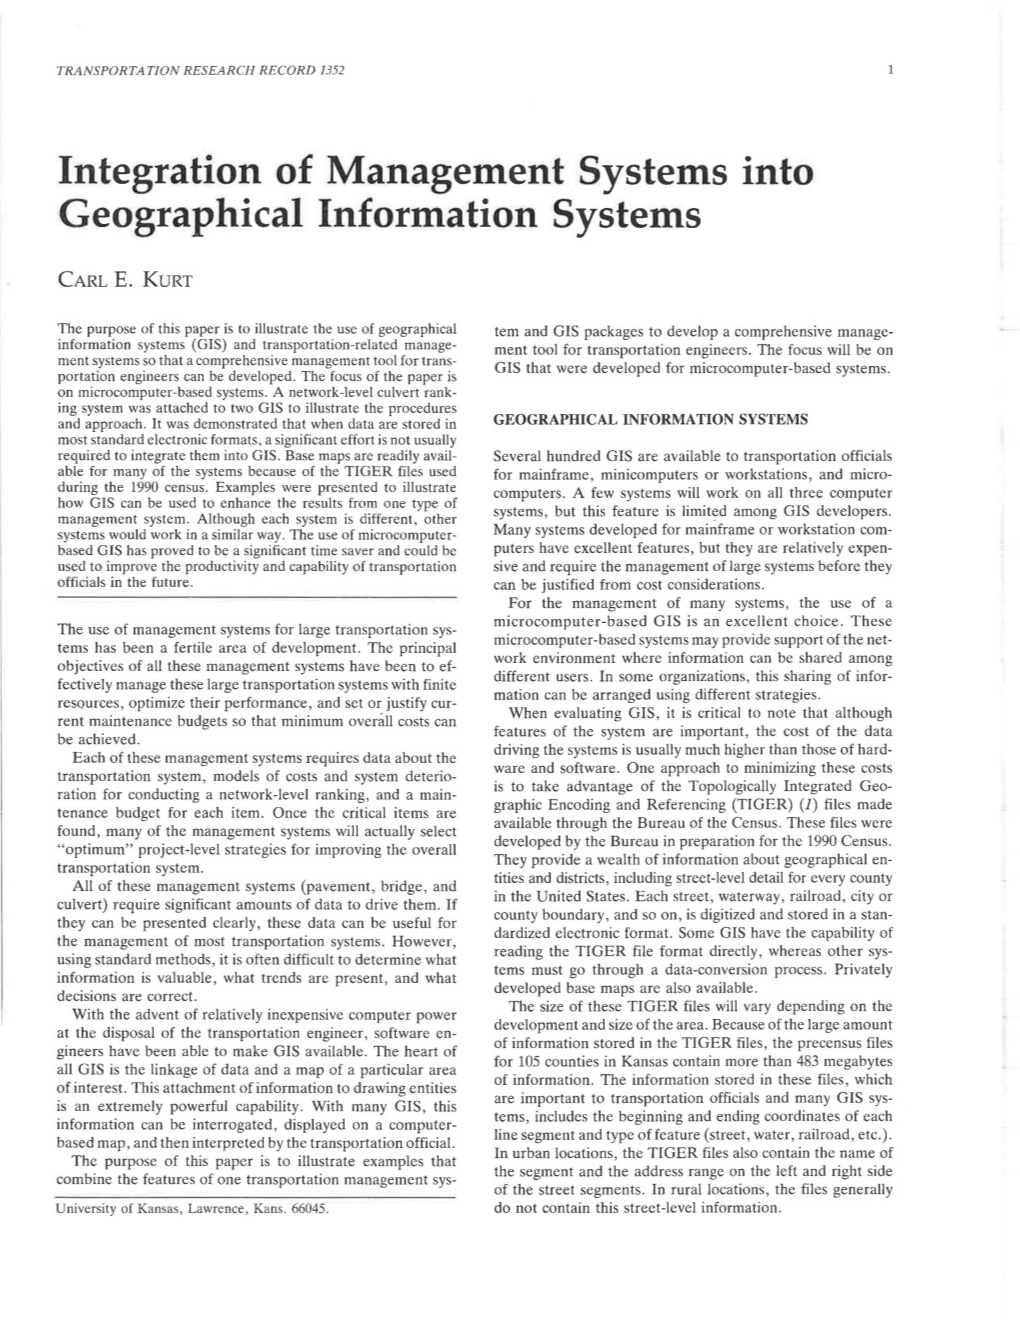 Integration of Management Systems Into Geographical Information Systems